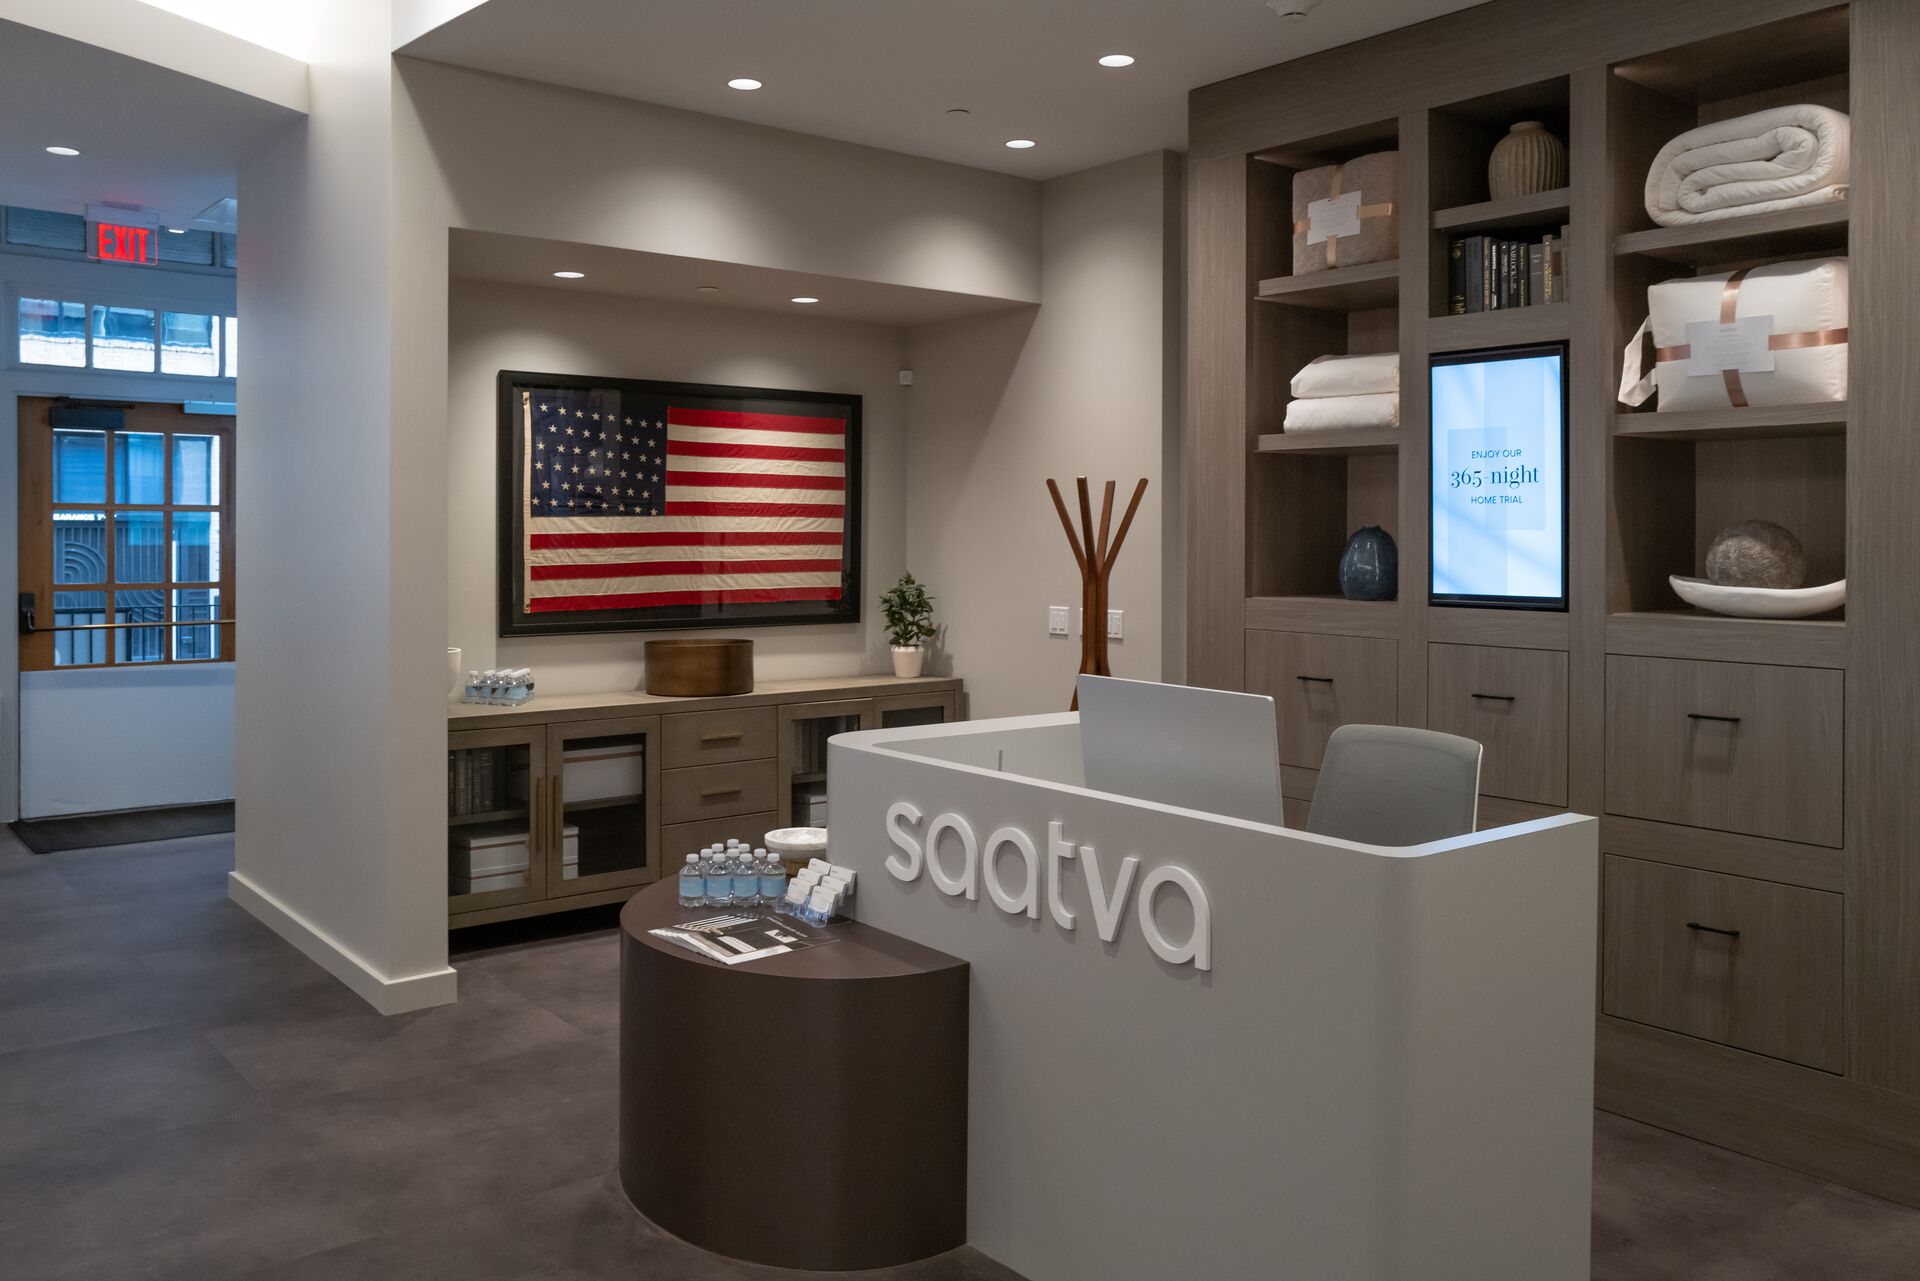 The welcome desk and historic American flag in the Saatva Portland Viewing Room.